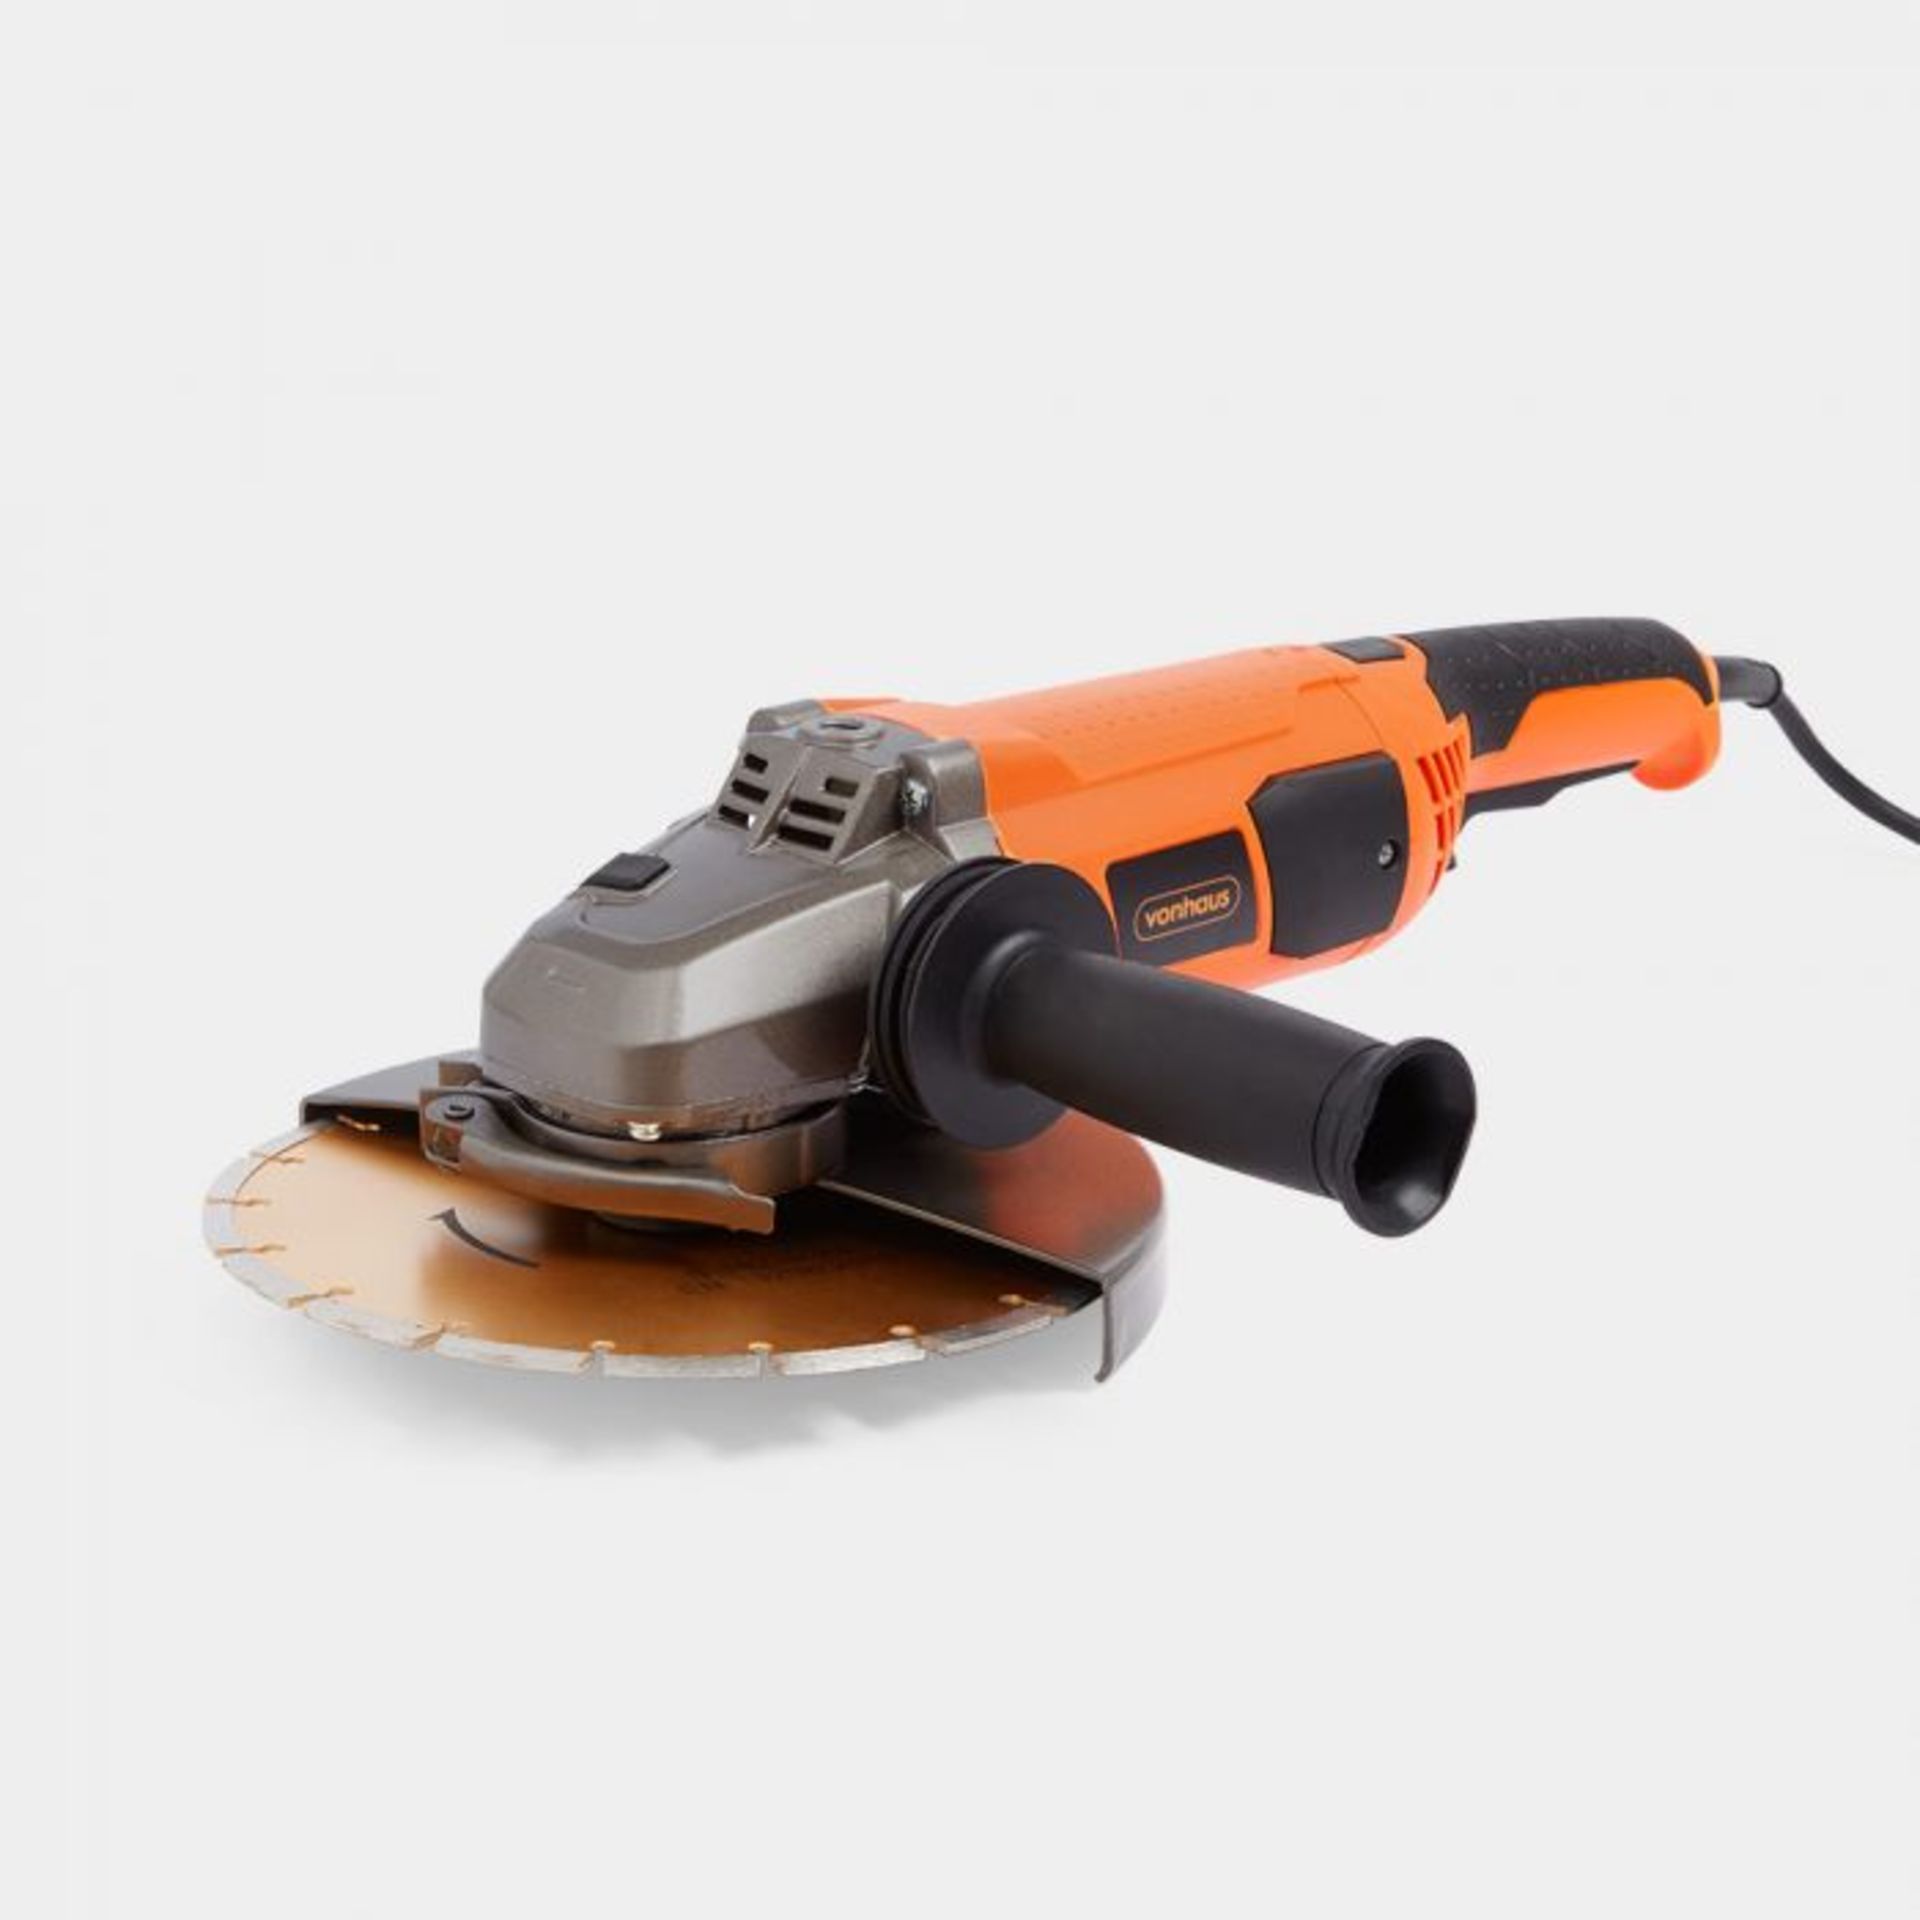 2200W 9" Angle Grinder. Our 9" Angle Grinder is a must have tool in your collection, ideal for those